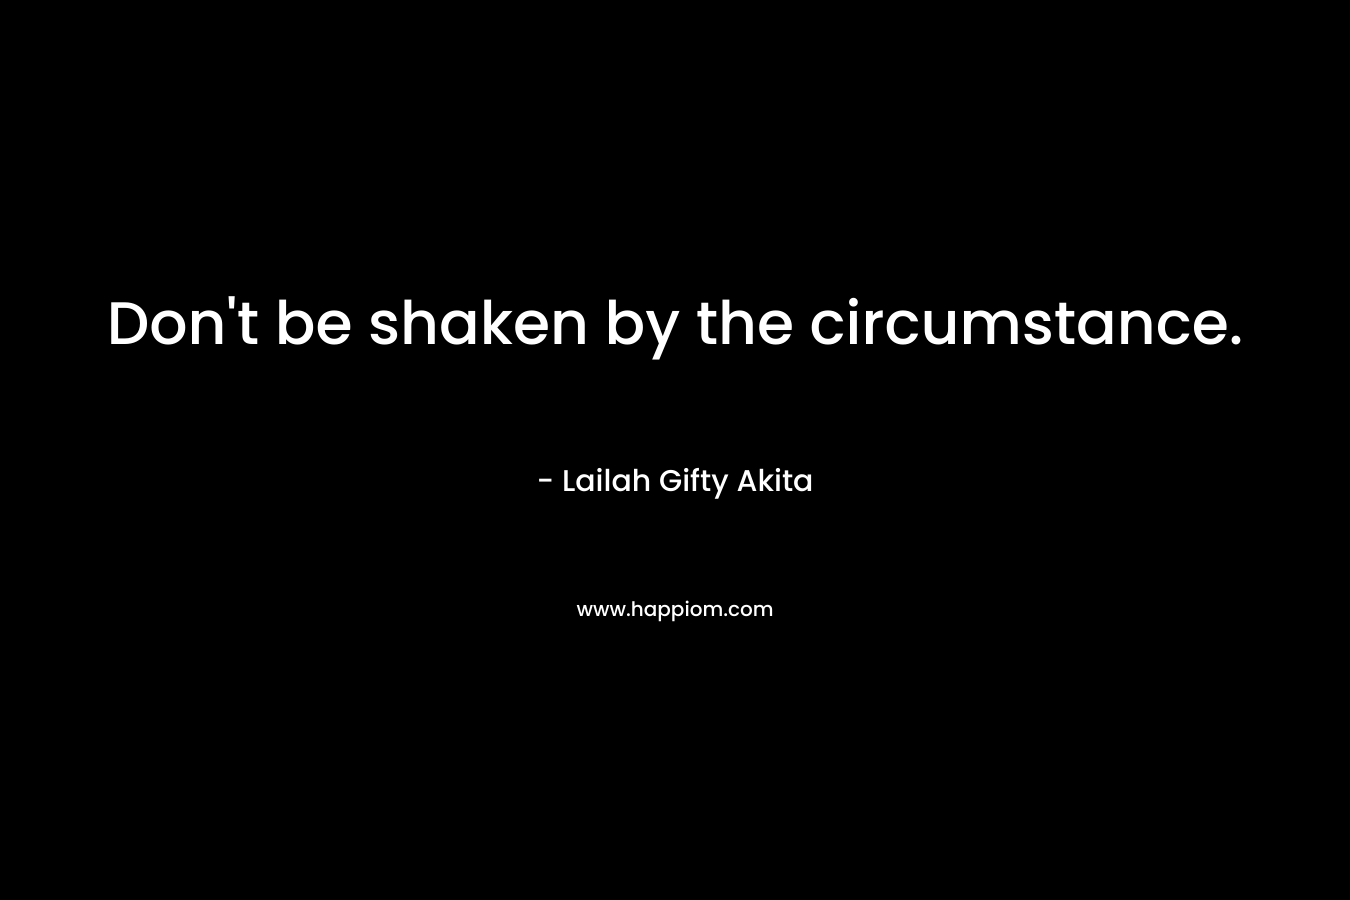 Don’t be shaken by the circumstance. – Lailah Gifty Akita